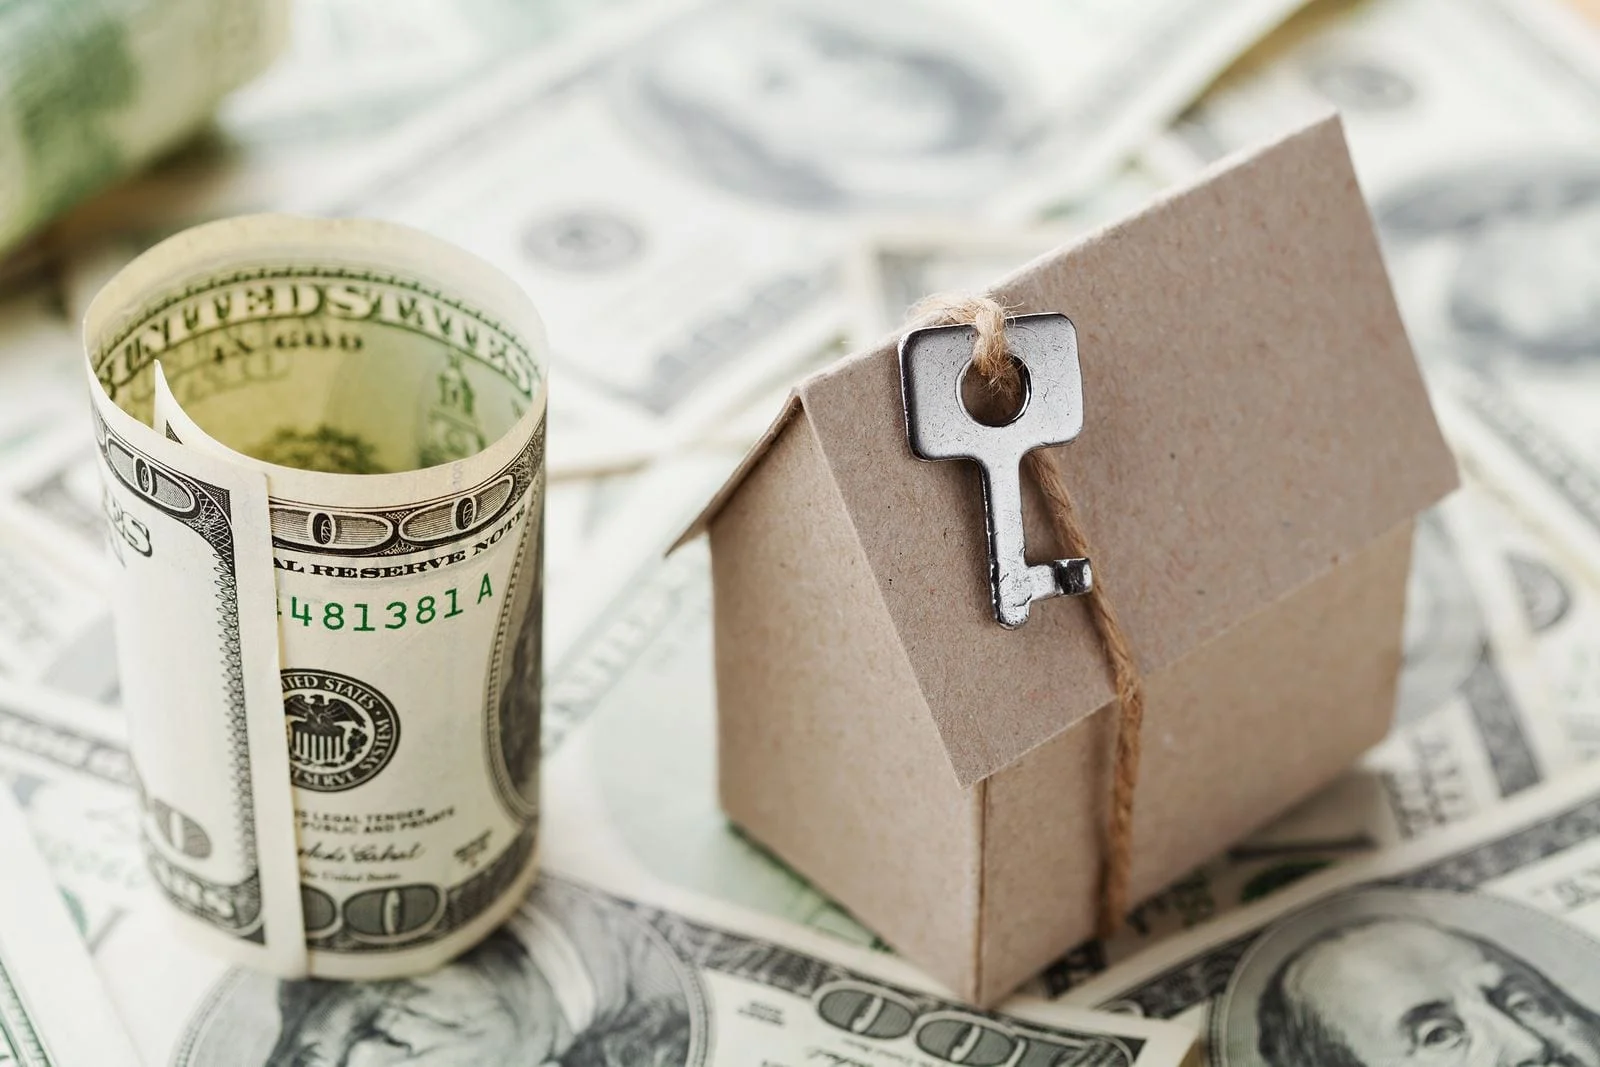 Is Money6x Real Estate Right for You?